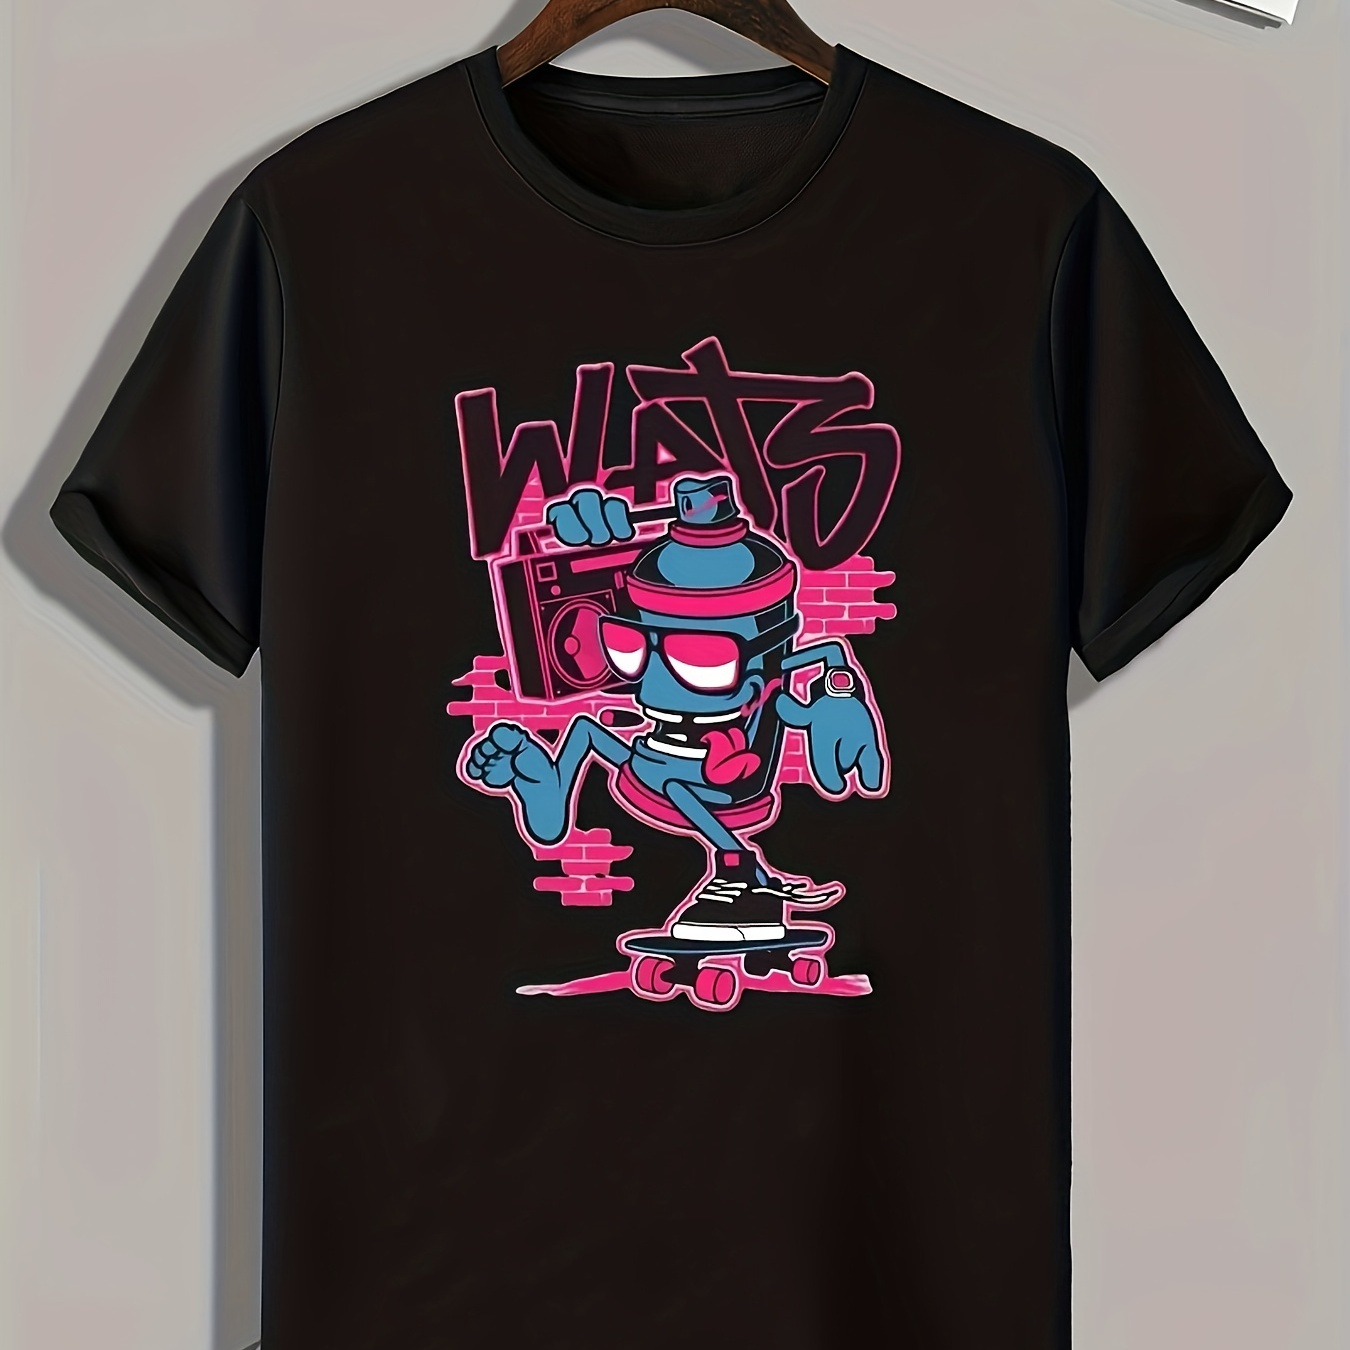 

Cartoon Going Skateboarding Print, Men's Graphic T-shirt, Casual Comfy Tees For Summer, Mens Clothing